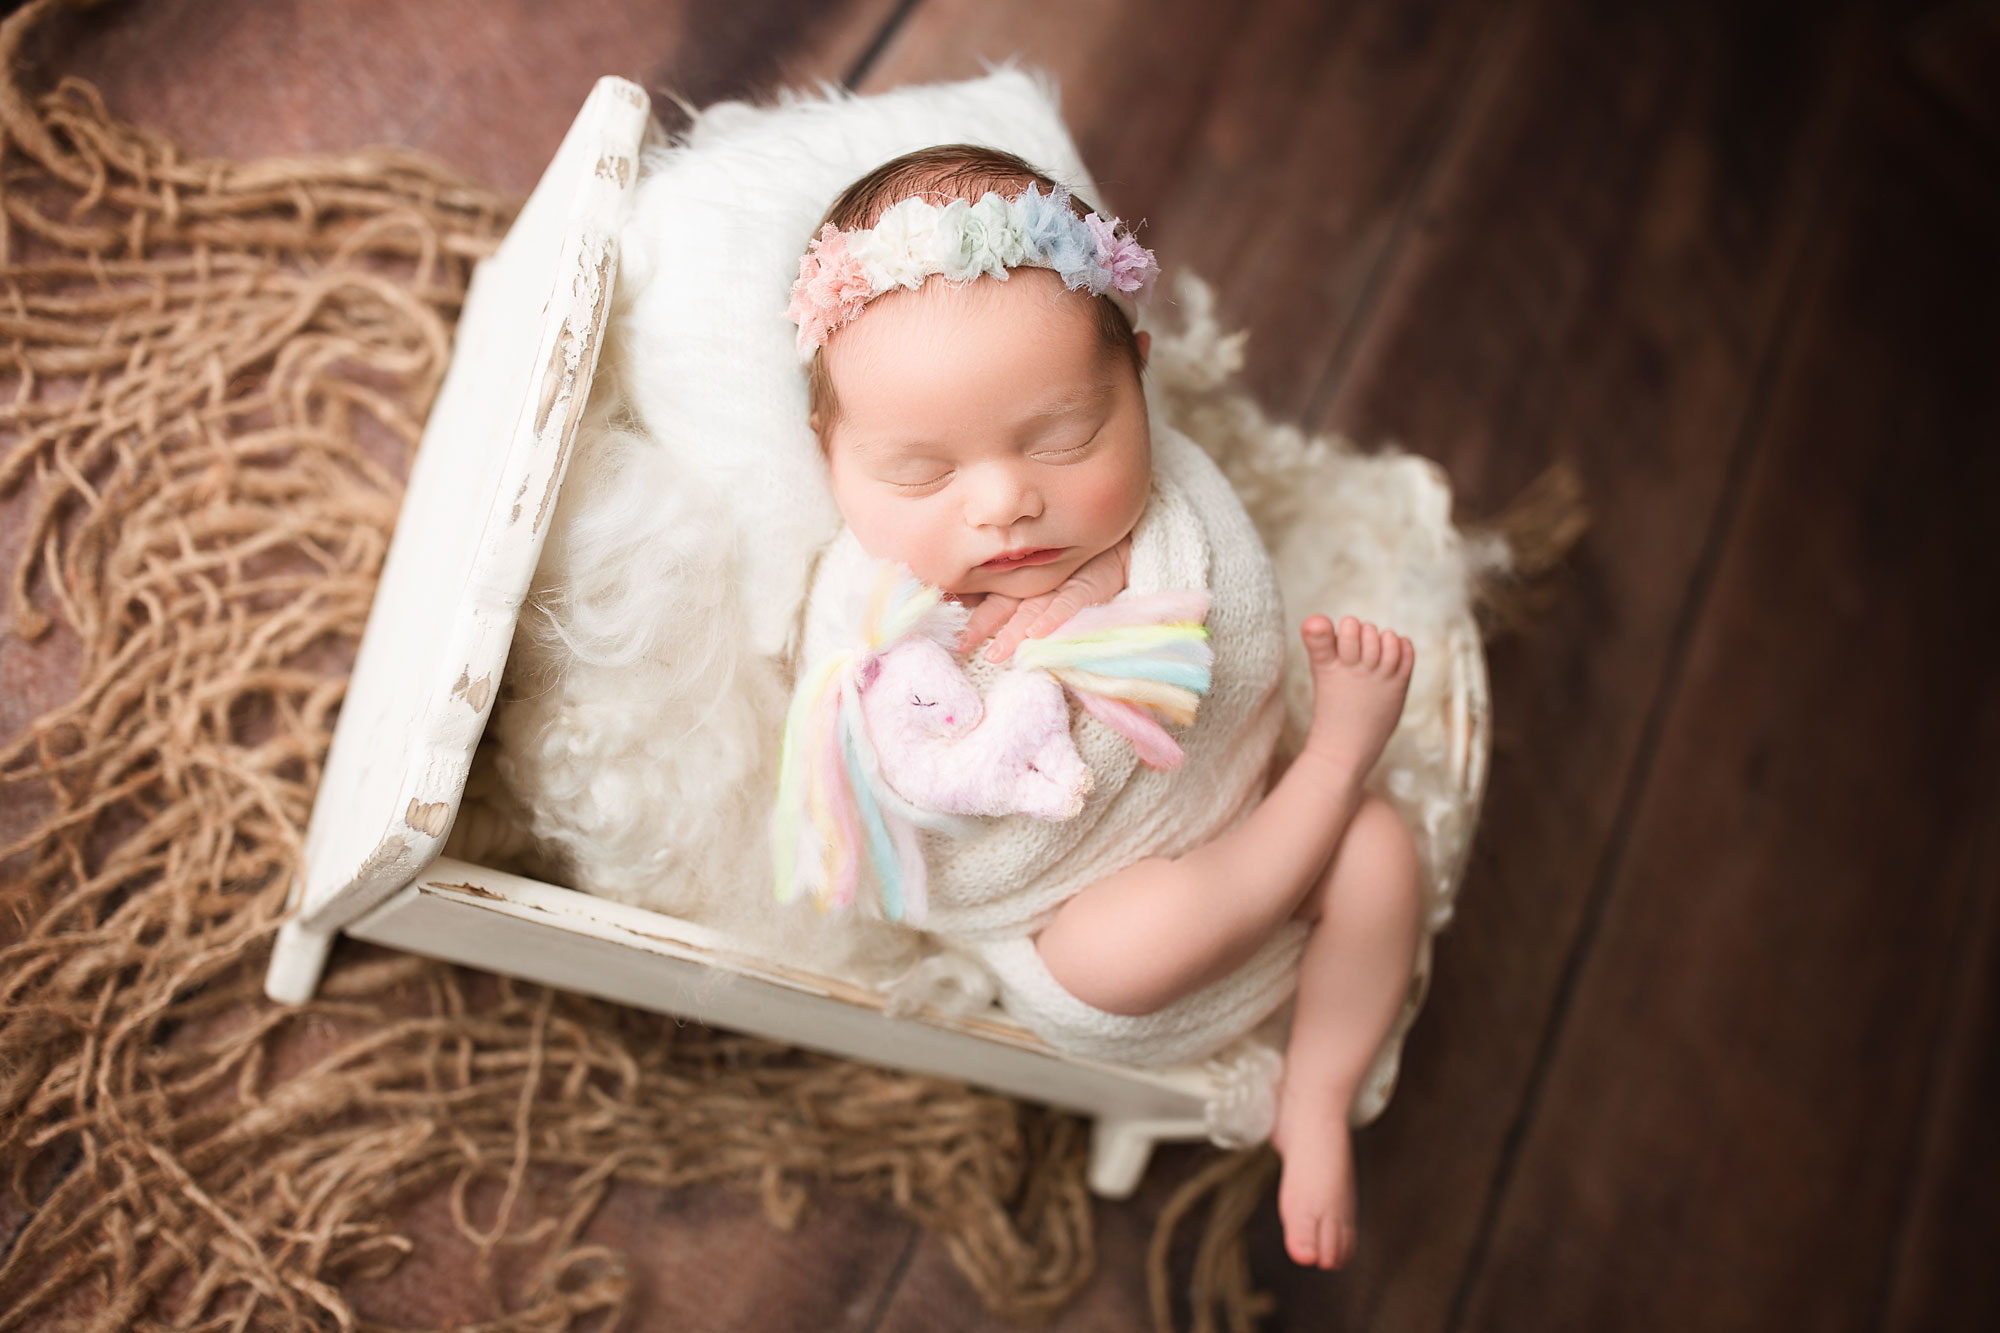 morris county rainbow baby photo session baby in a bucket 